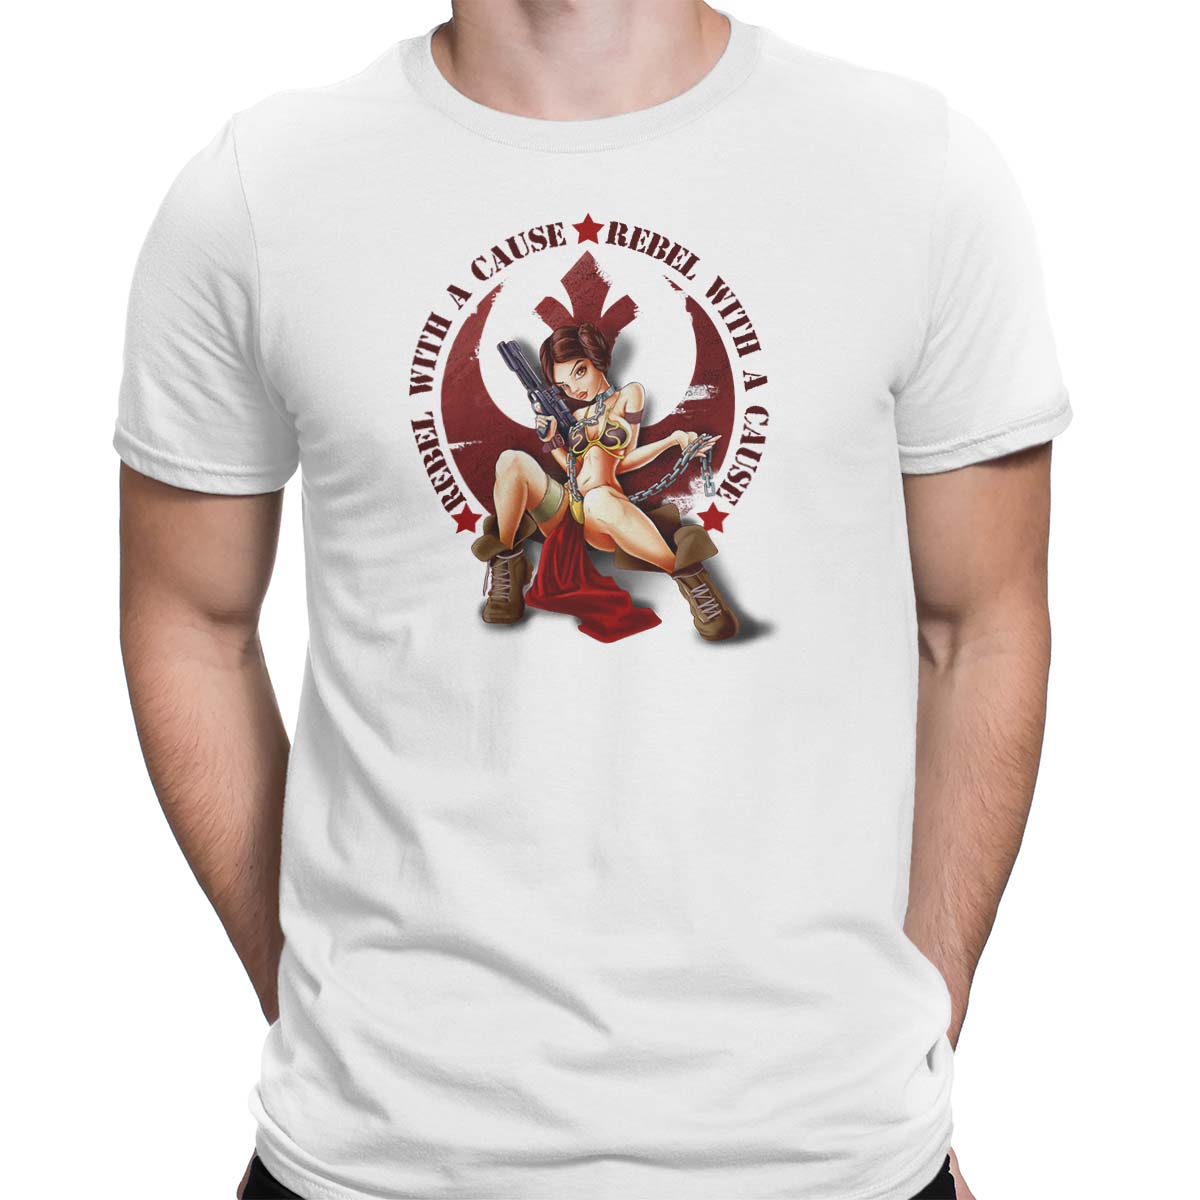 star wars rebel with a cause tshirt white